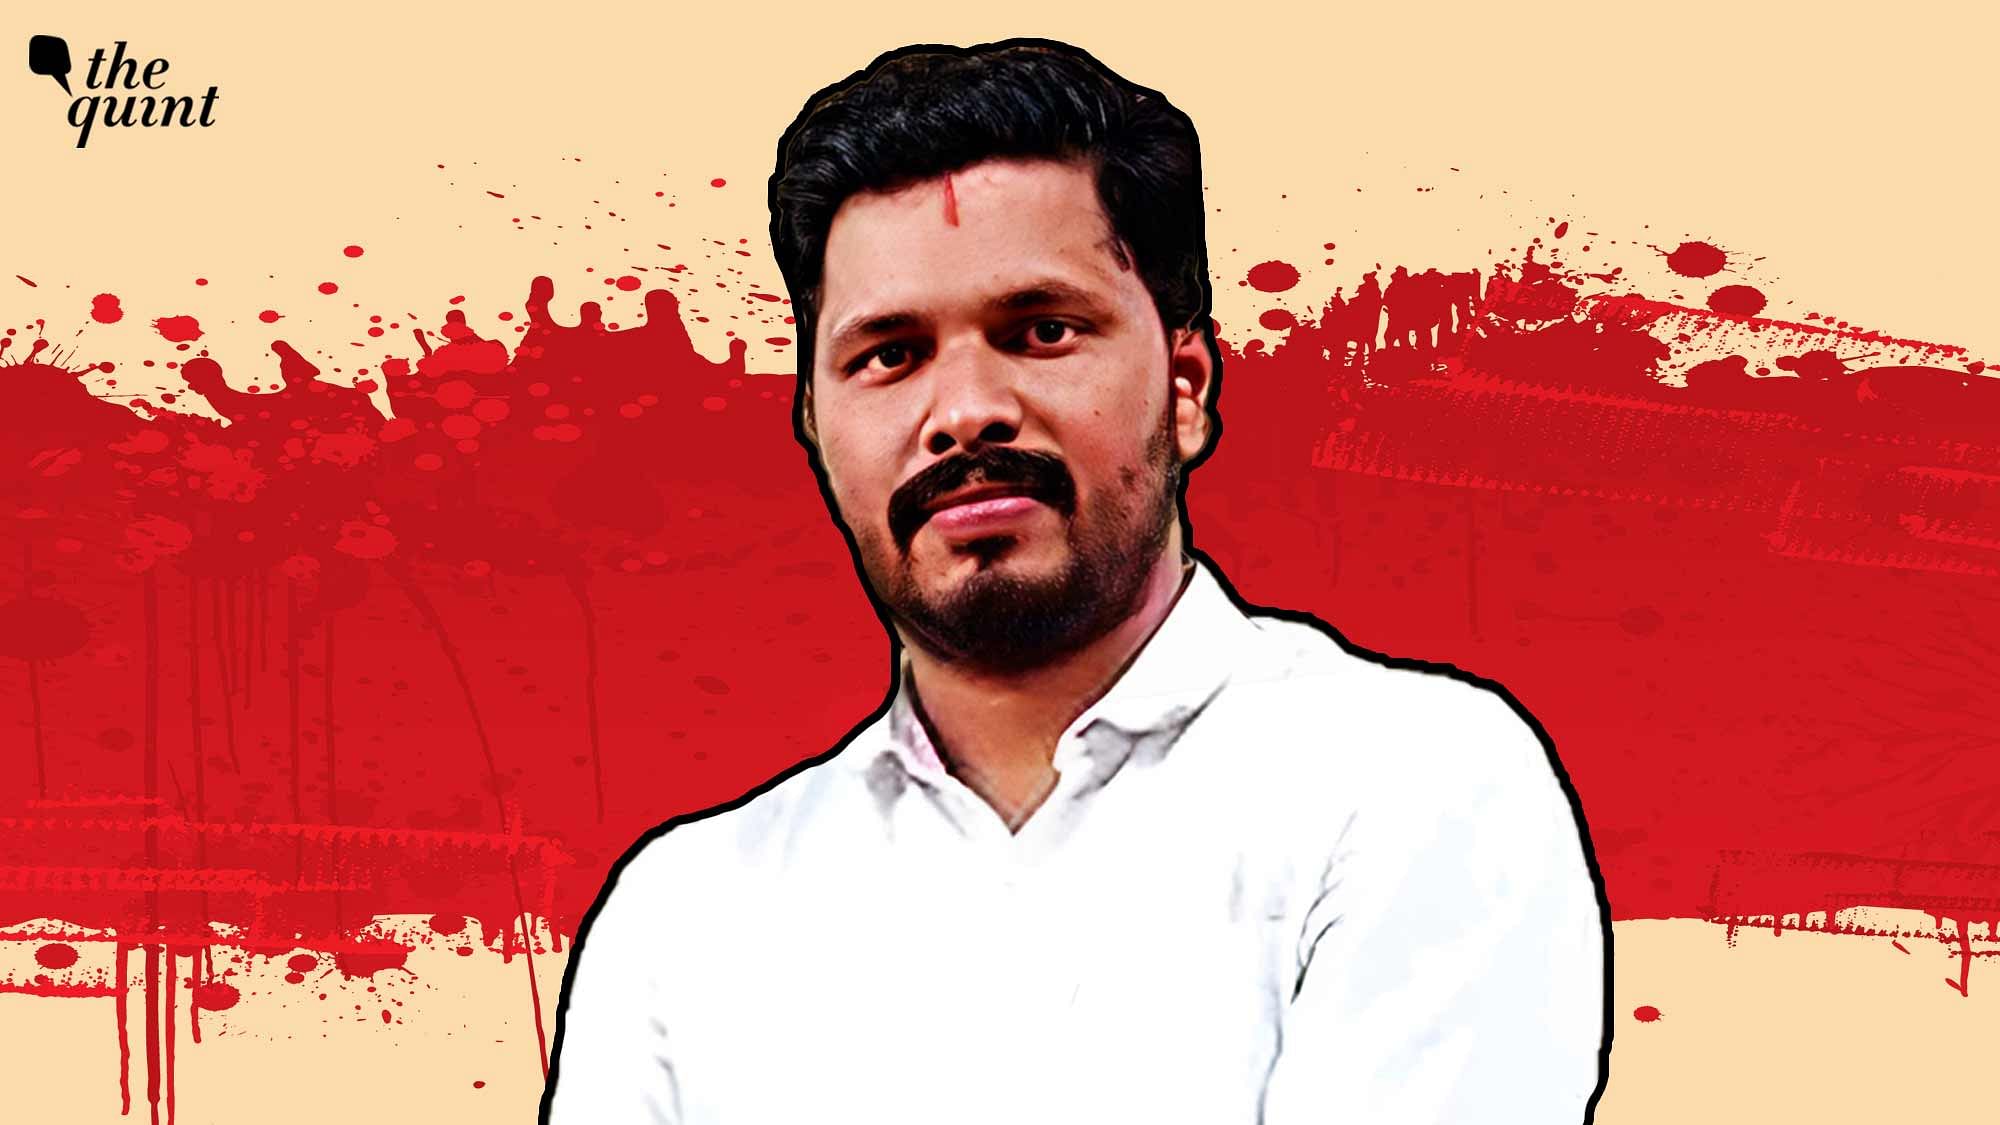 <div class="paragraphs"><p>Days after a youth leader of the <a href="https://www.thequint.com/topic/karnataka">Bharatiya Janata Party (BJP)</a>, Praveen Nettaru, was killed in Karnataka, two more persons – Saddam and Harris – were arrested in connection with the <a href="https://www.thequint.com/south-india/bjp-youth-leader-murdered-in-karnatakas-dakshin-kannada-by-men-on-bike-party-stages-protests">murder</a> on Tuesday, 2 August.</p></div>